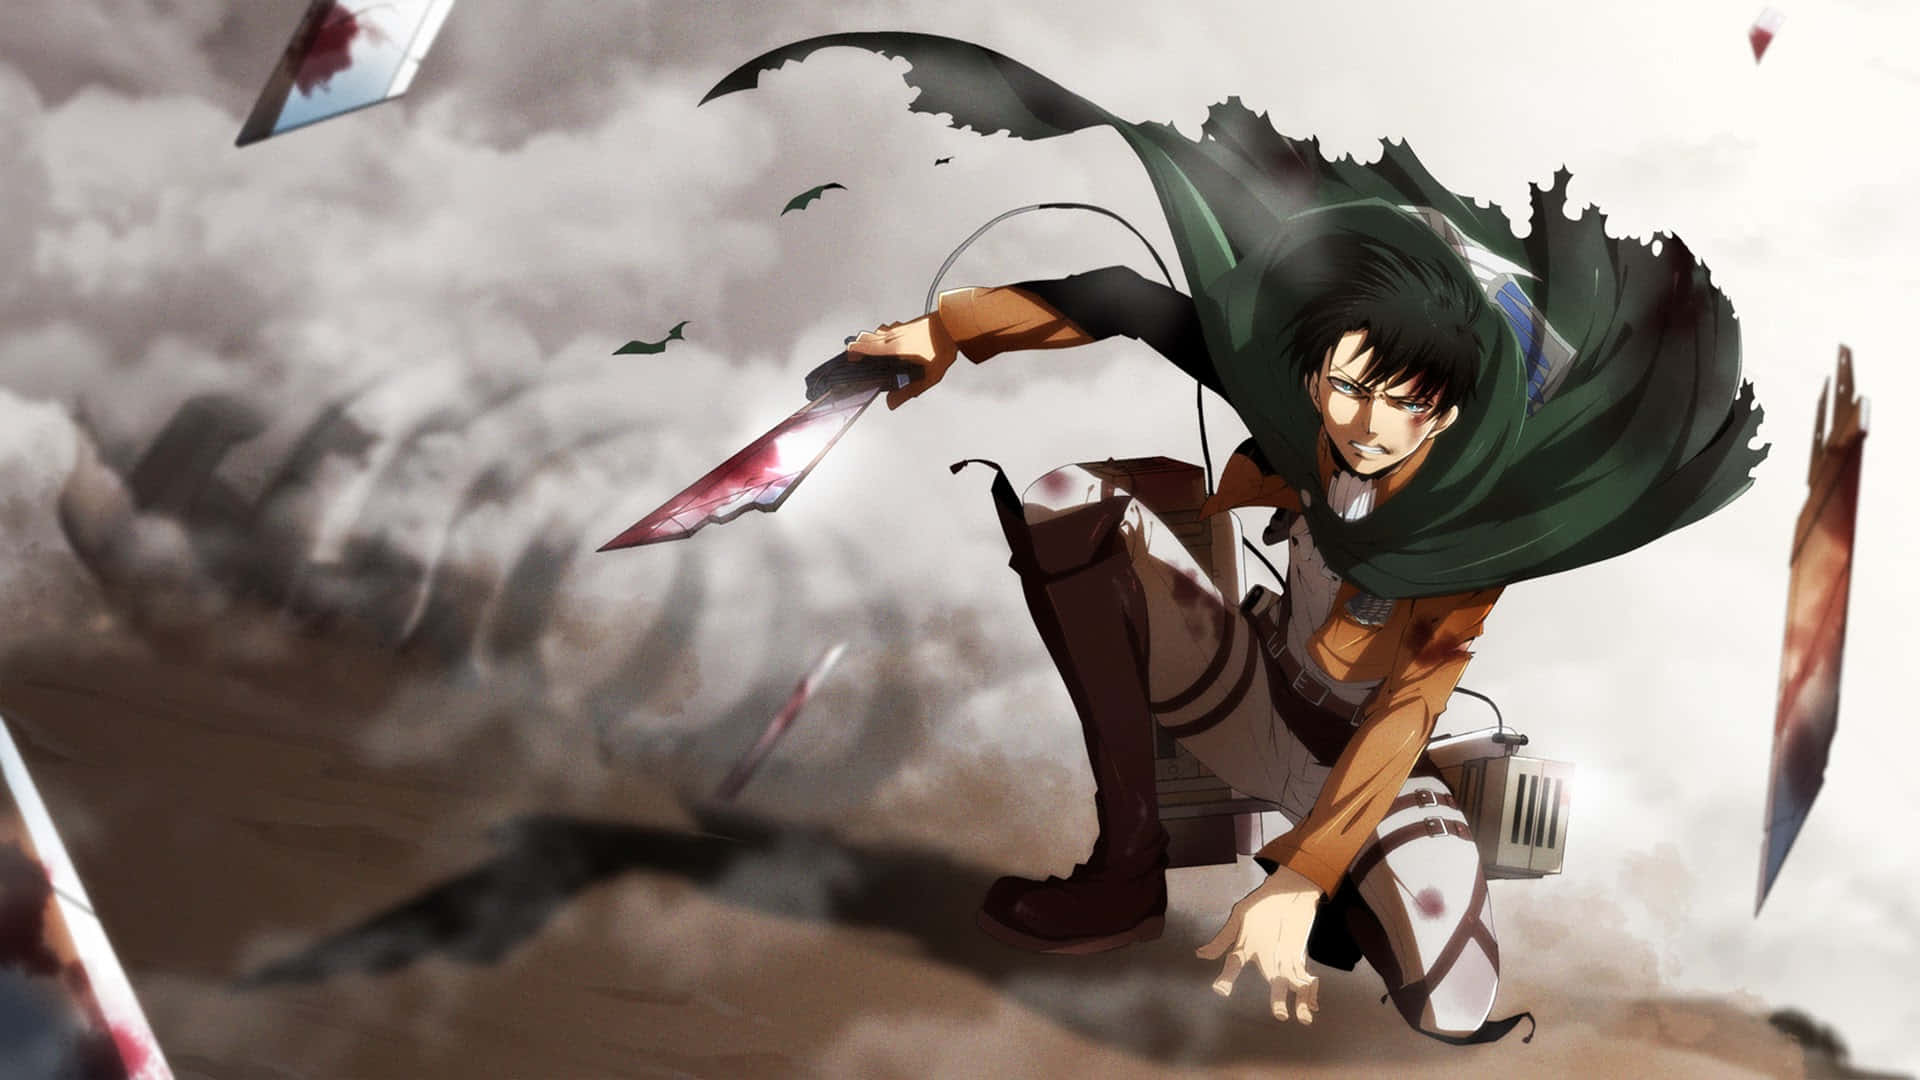 Enjoy the intense action of Attack on Titan in the new video game Wallpaper